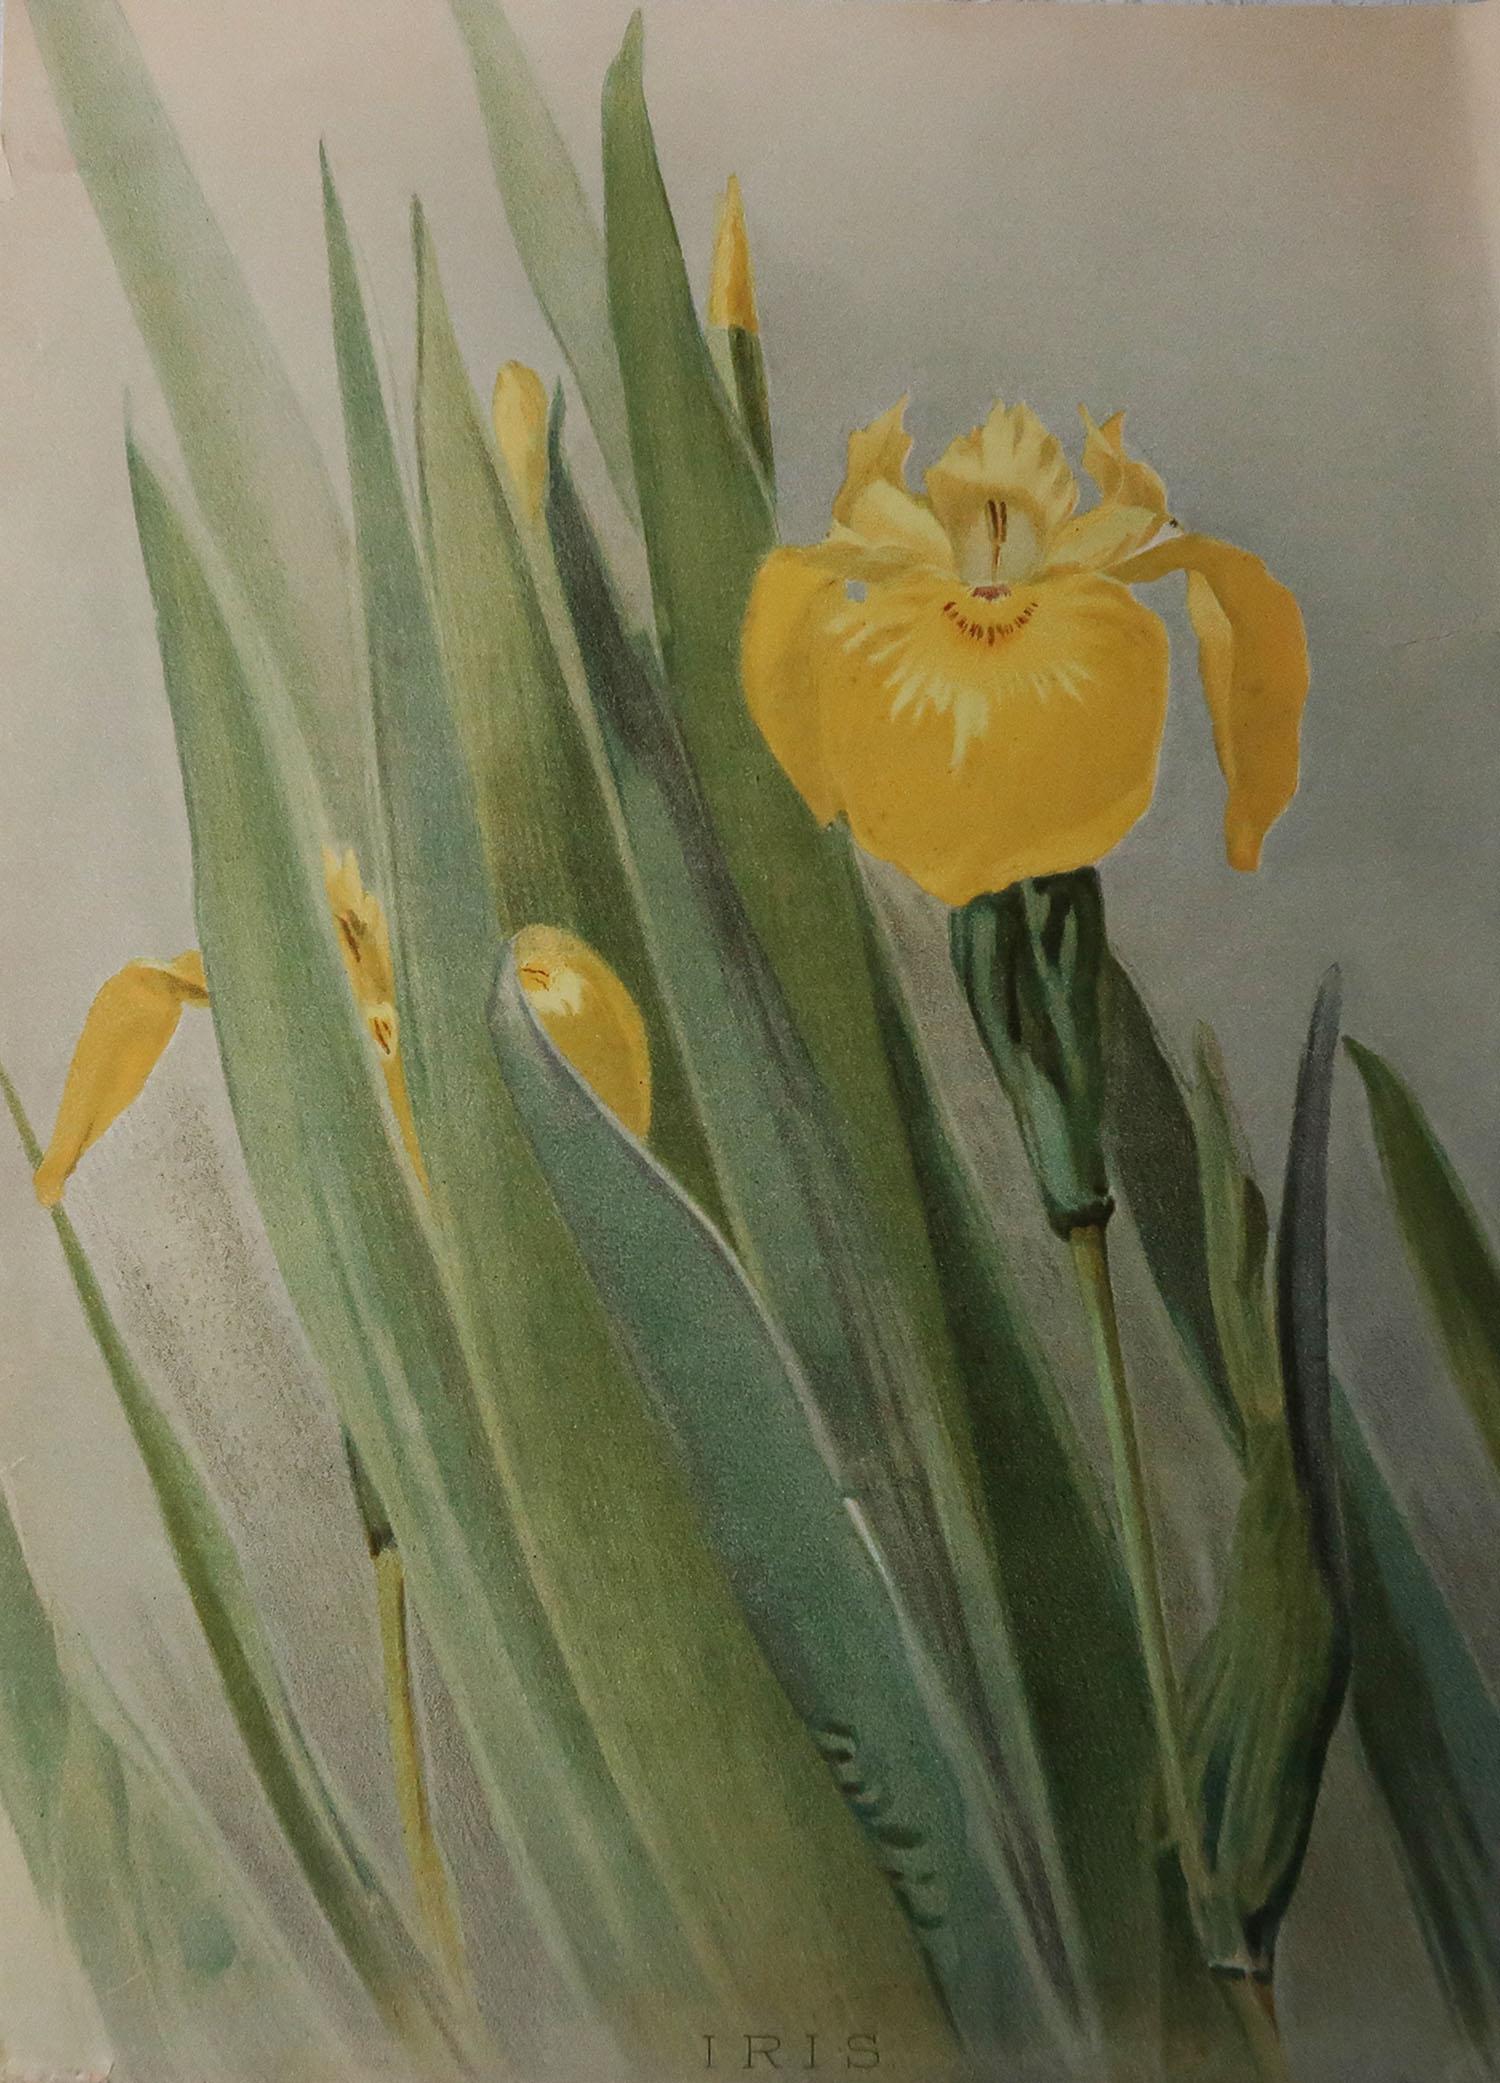 Great image of an iris

Chromo-lithograph

Published by Edward Arnold. C.1860

Unframed. It gives you the option of perhaps making a set up using your own choice of frames.














